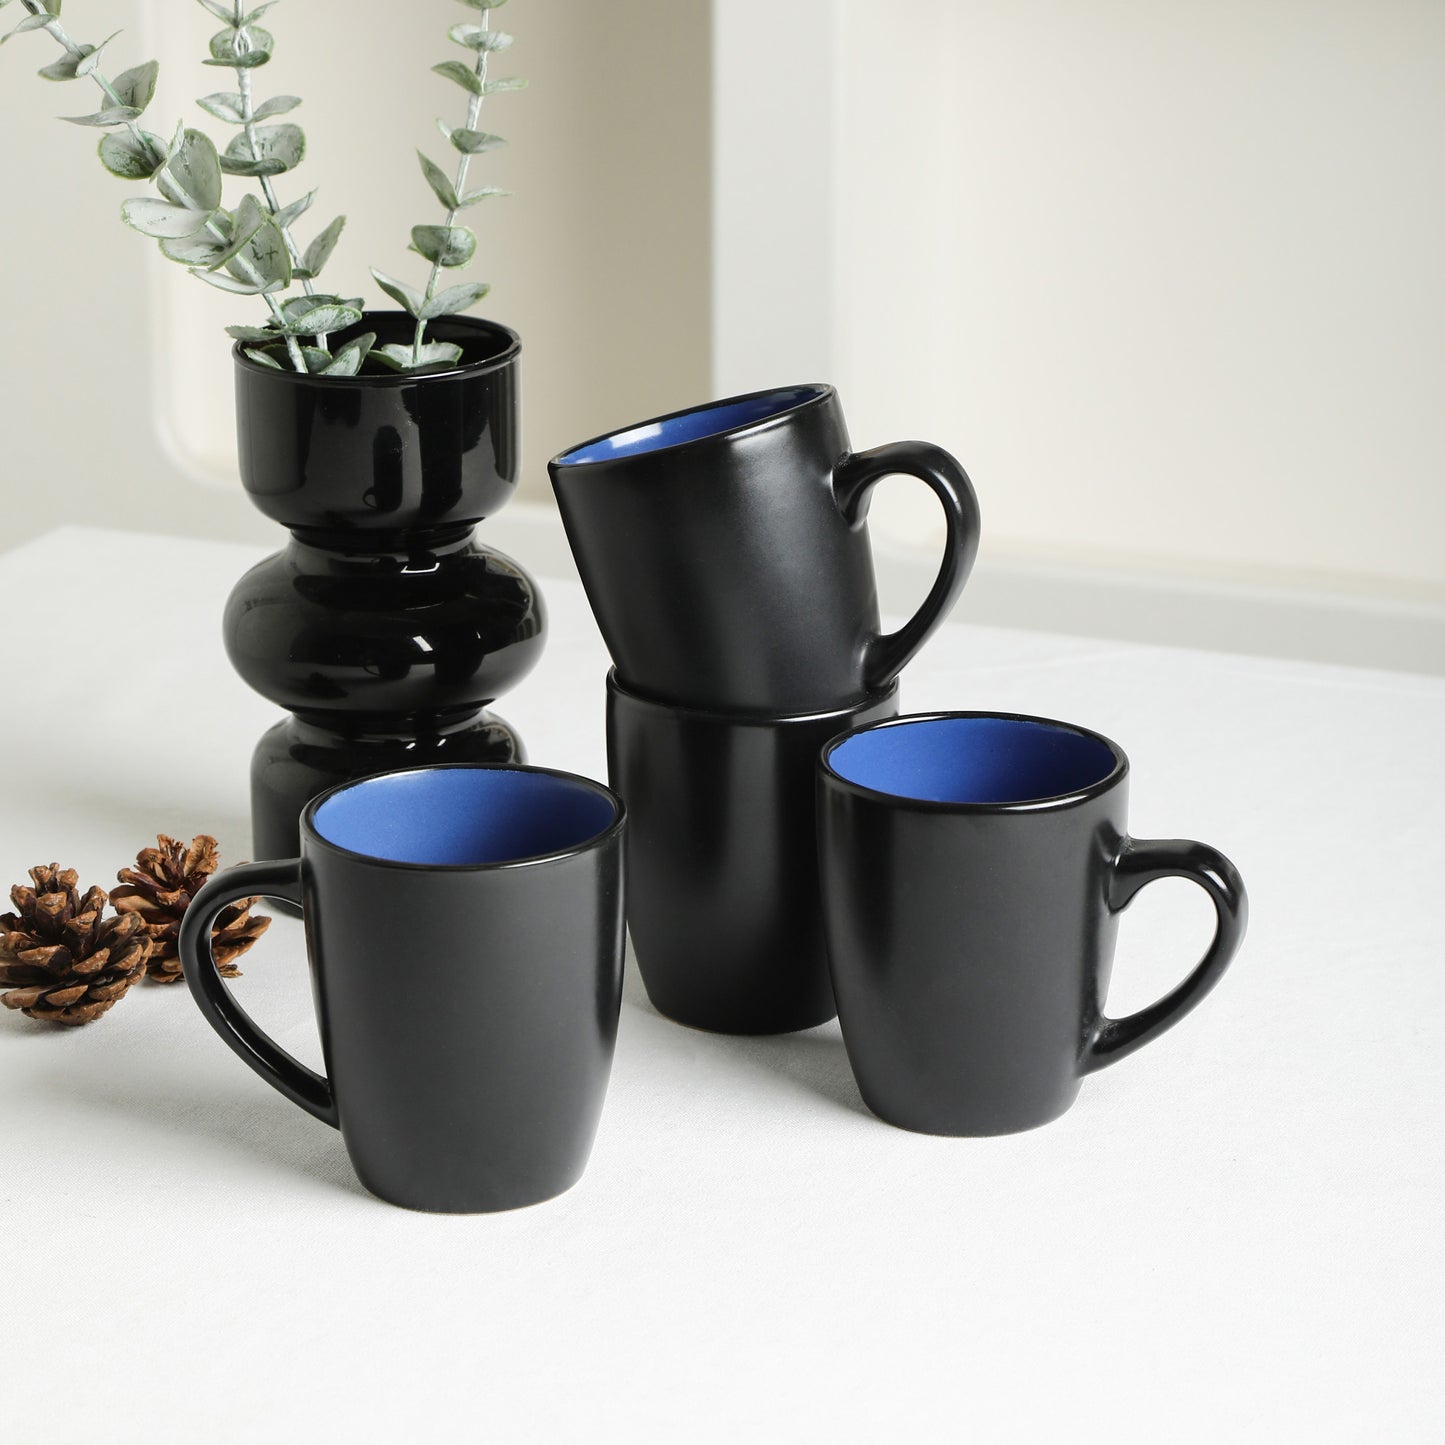 Albie Stoneware Dinnerware Set with Pasta Bowls - Blue And Black